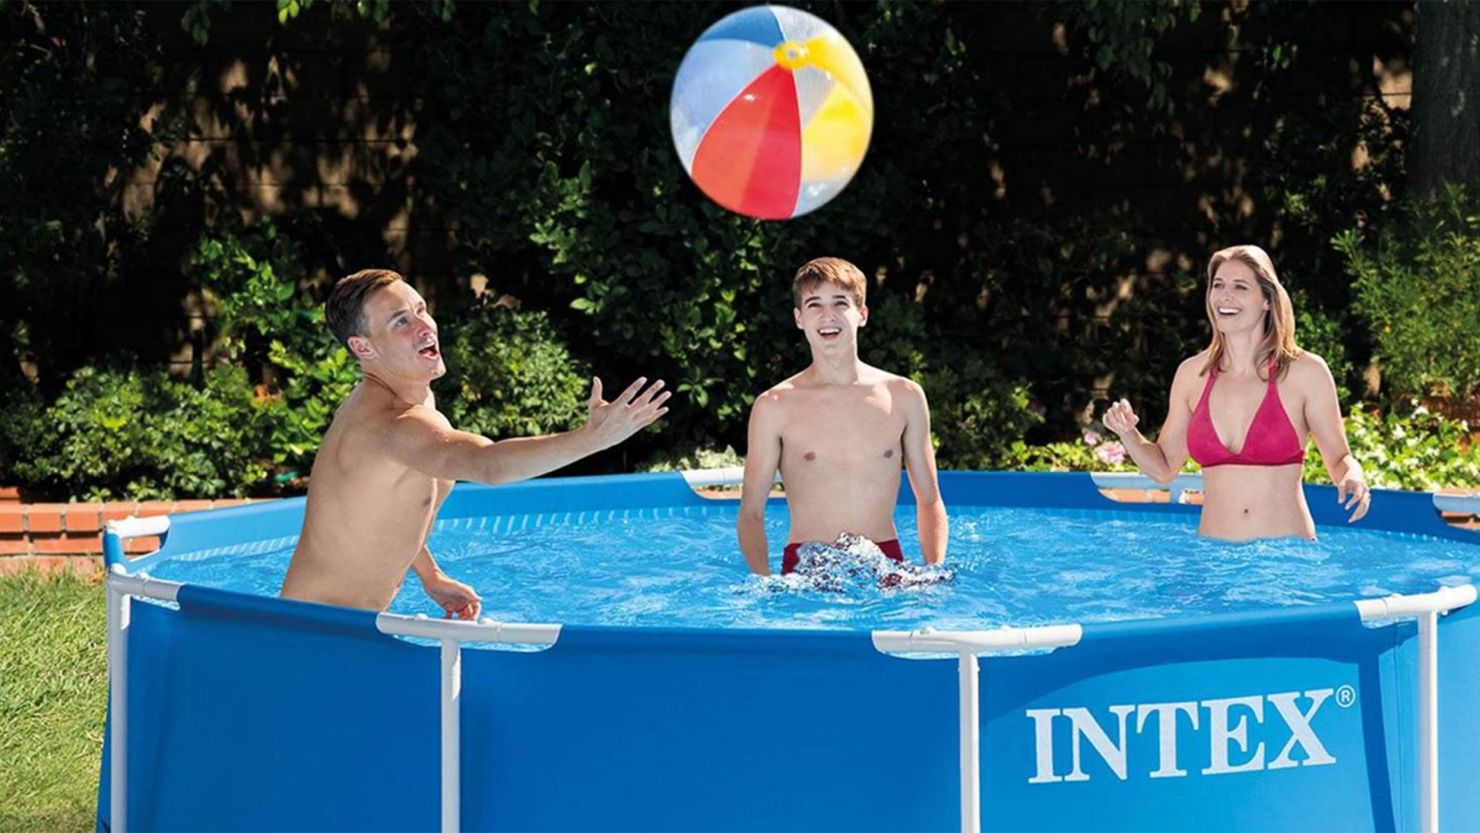 8 Things That Will Help Maximize and Clean Your Inflatable Pool